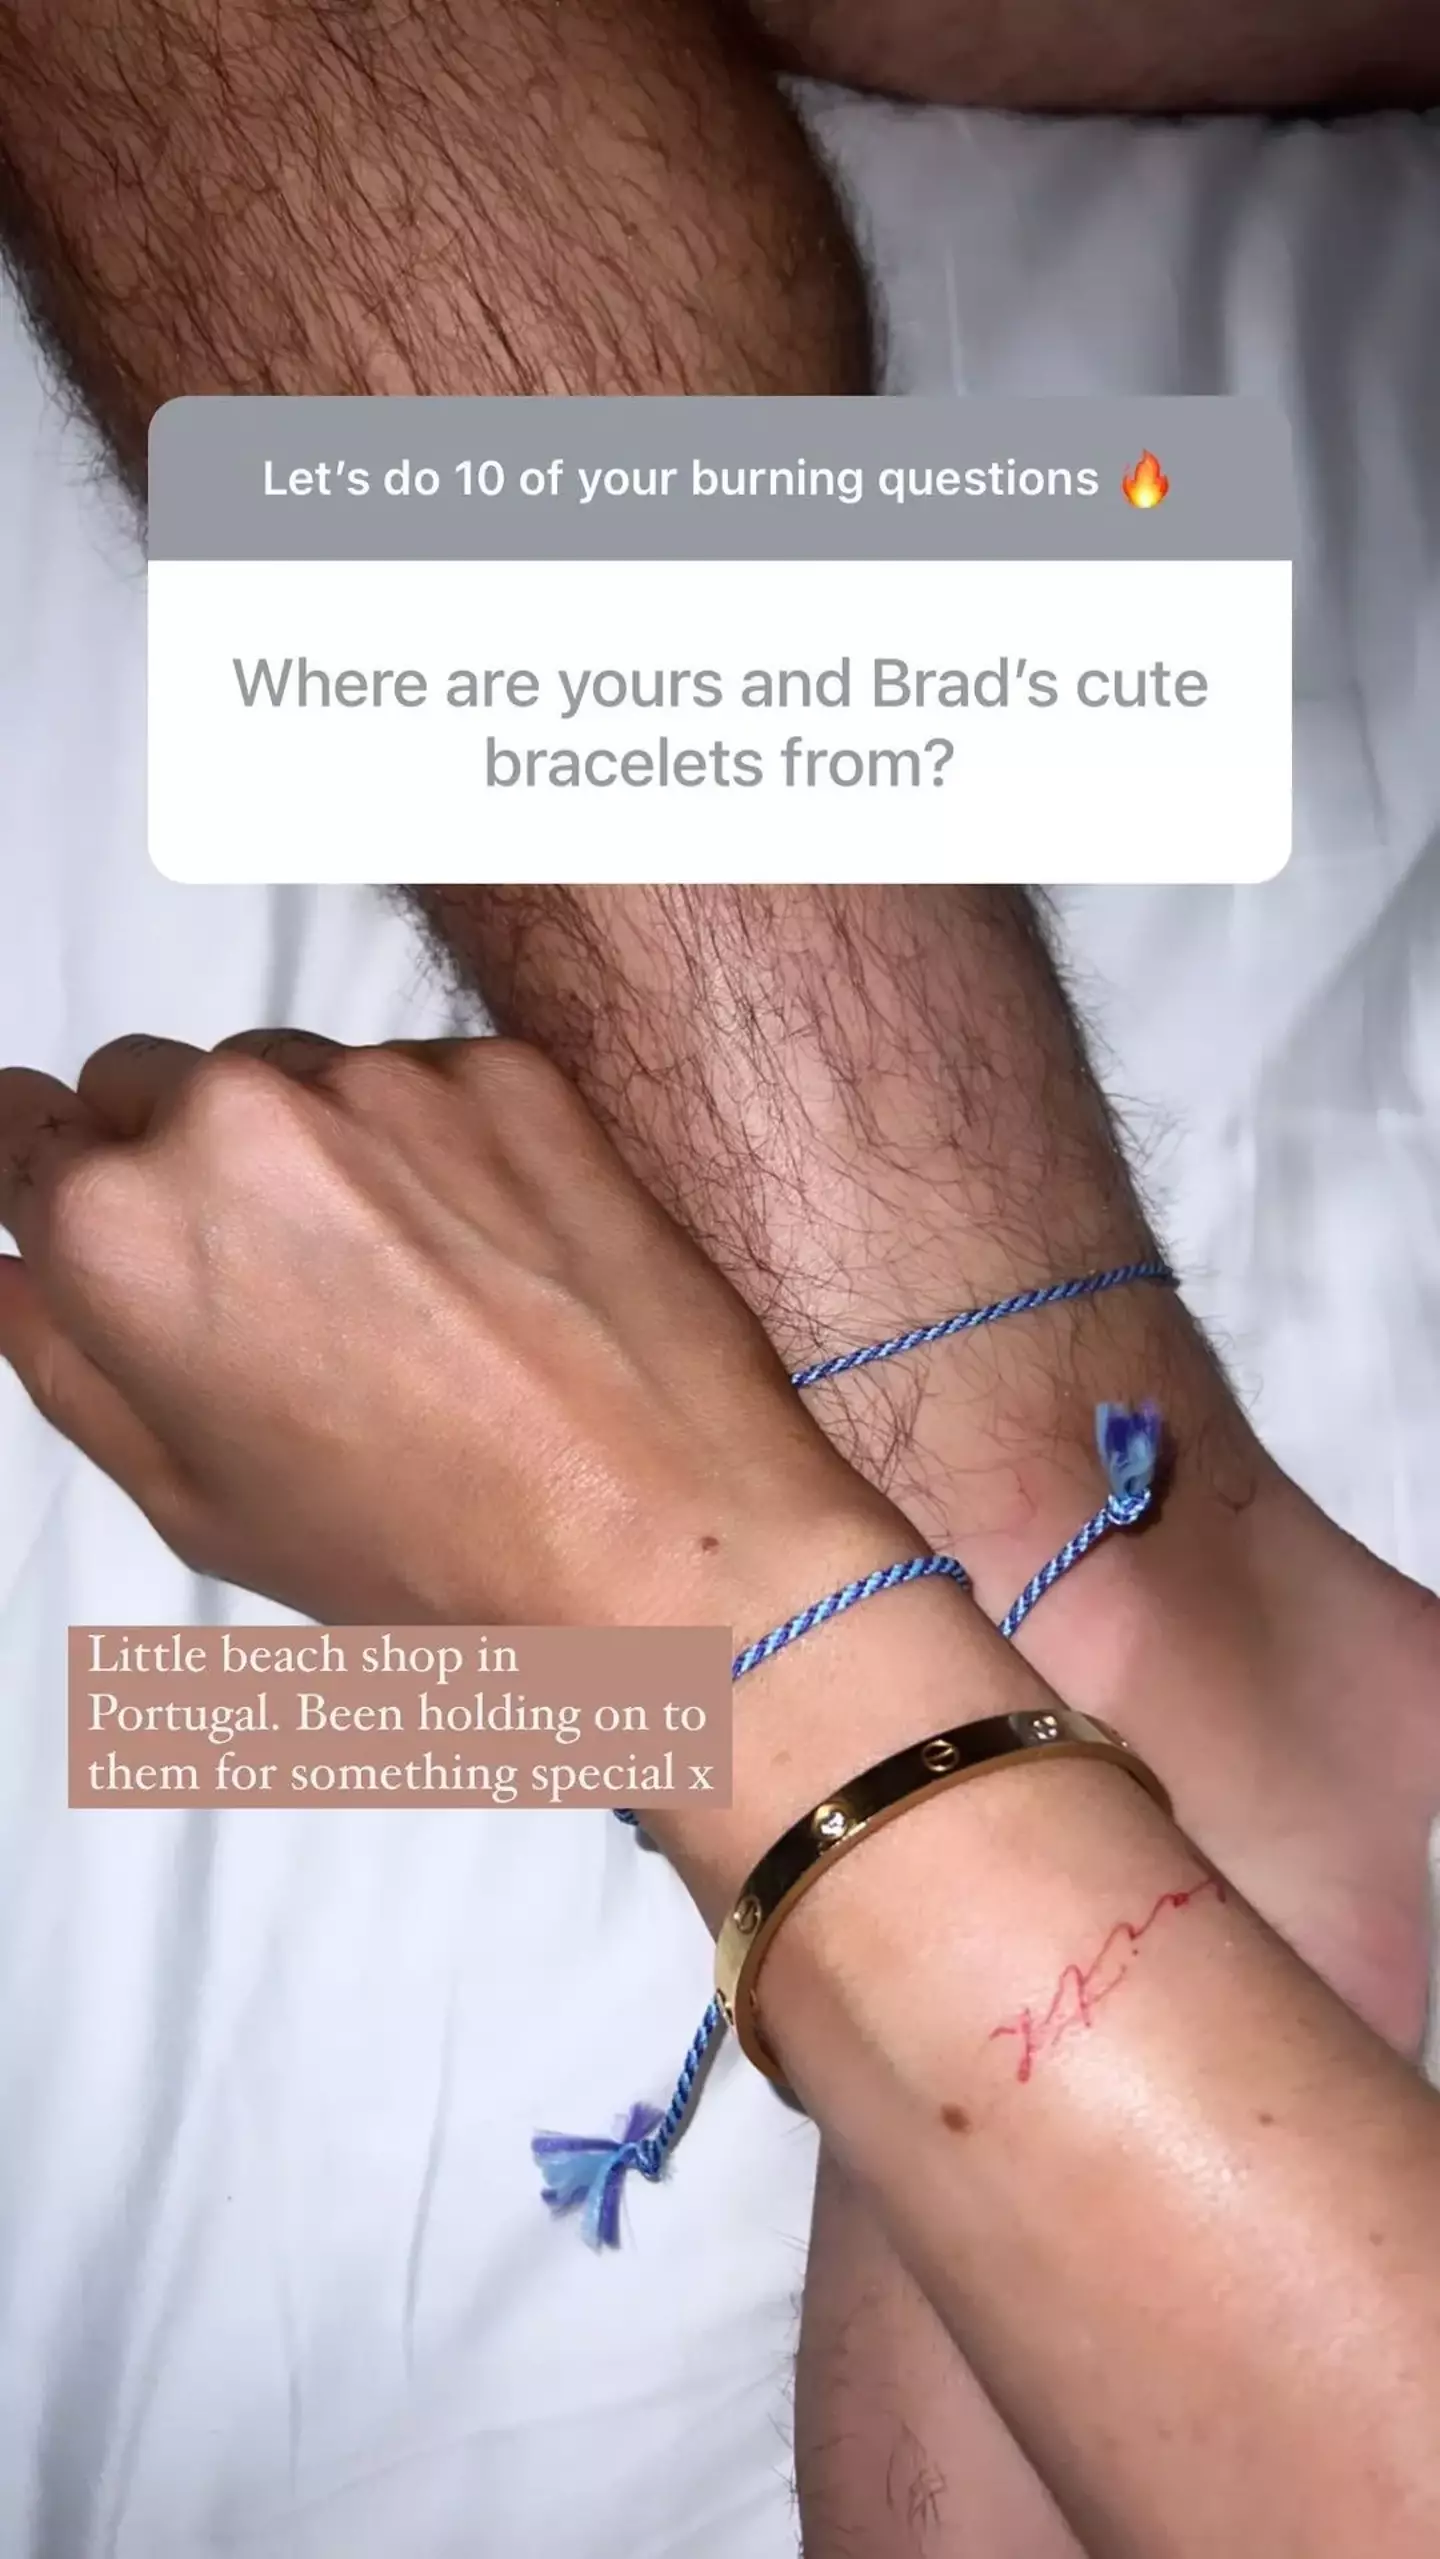 Attwood and Dack have matching blue bracelets.